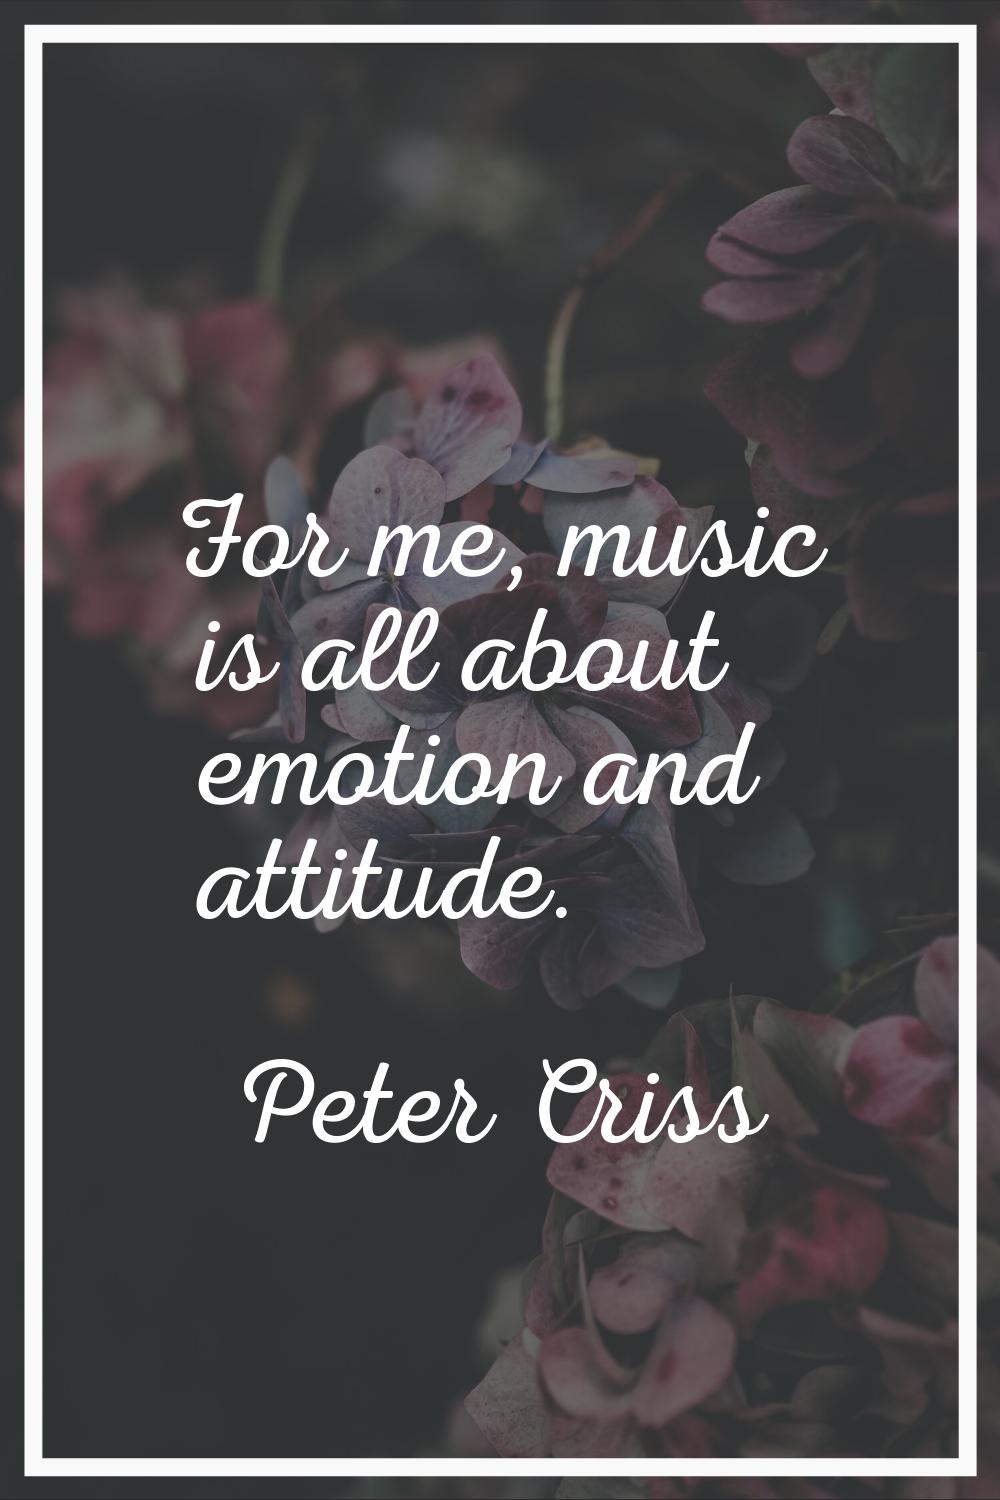 For me, music is all about emotion and attitude.